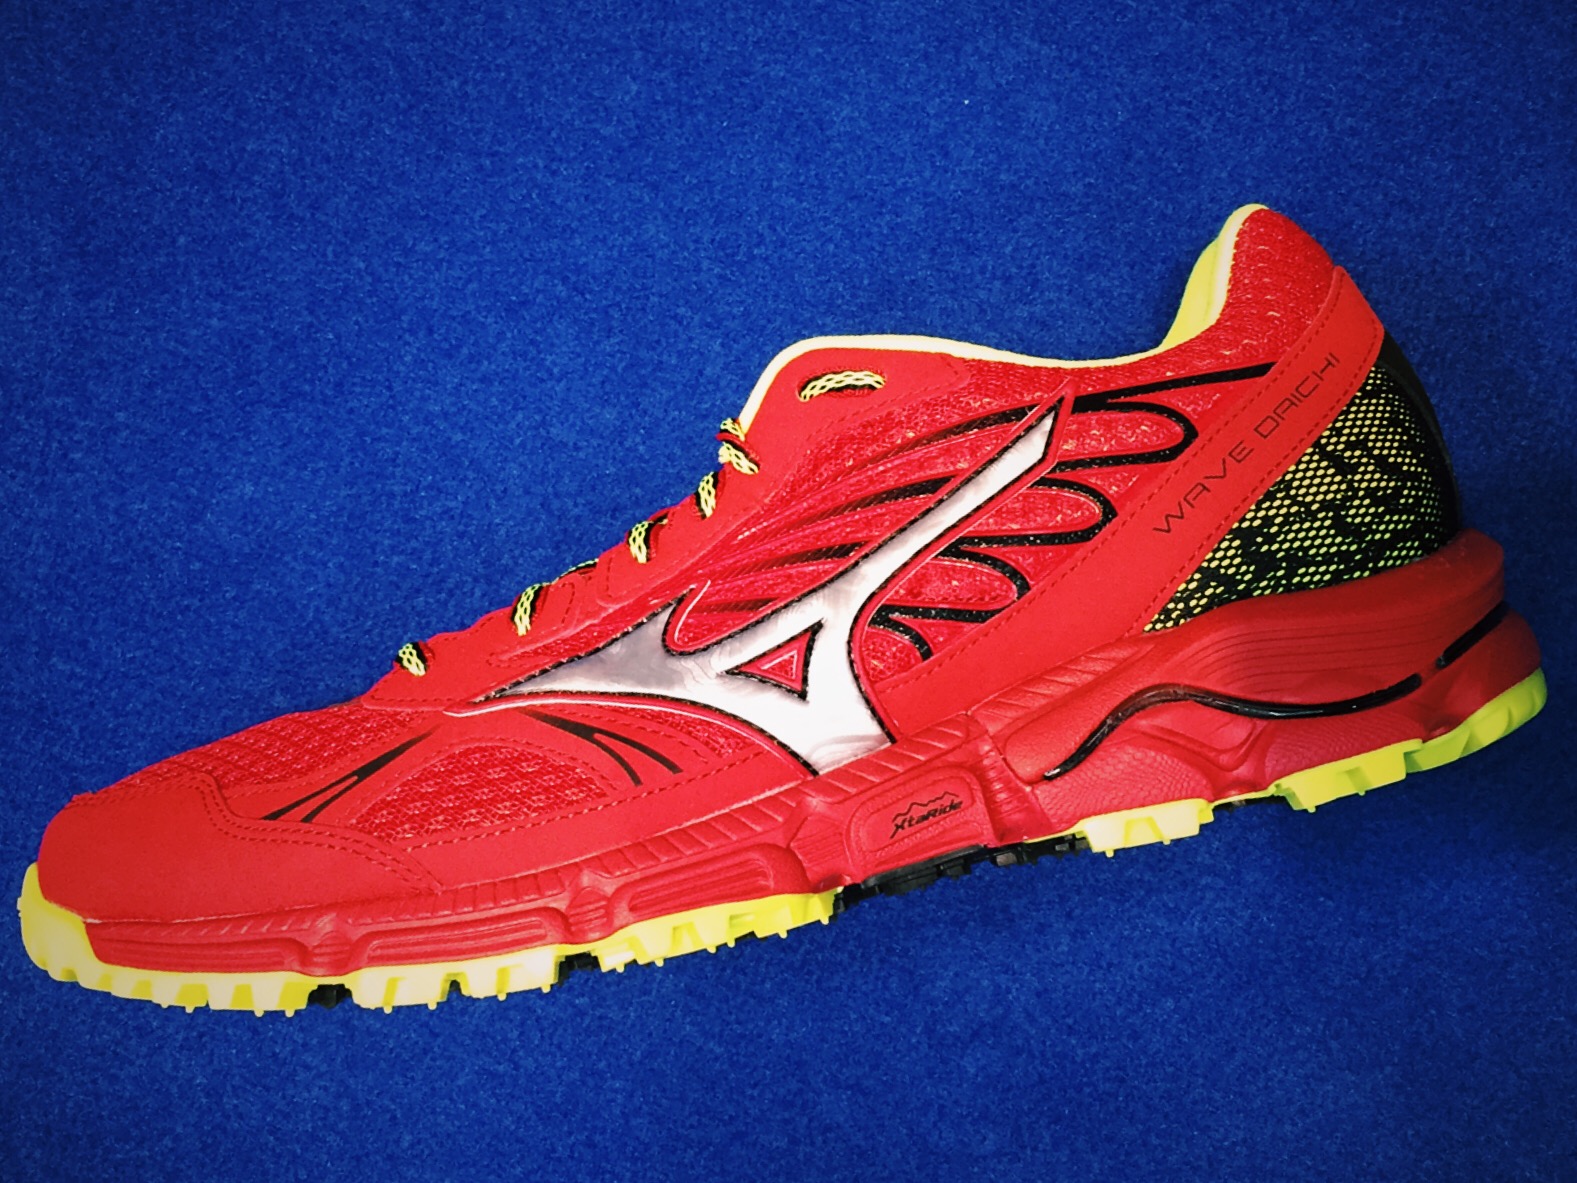 mizunos-trail-sector-gets-an-update-with-the-all-new-wave-daichi